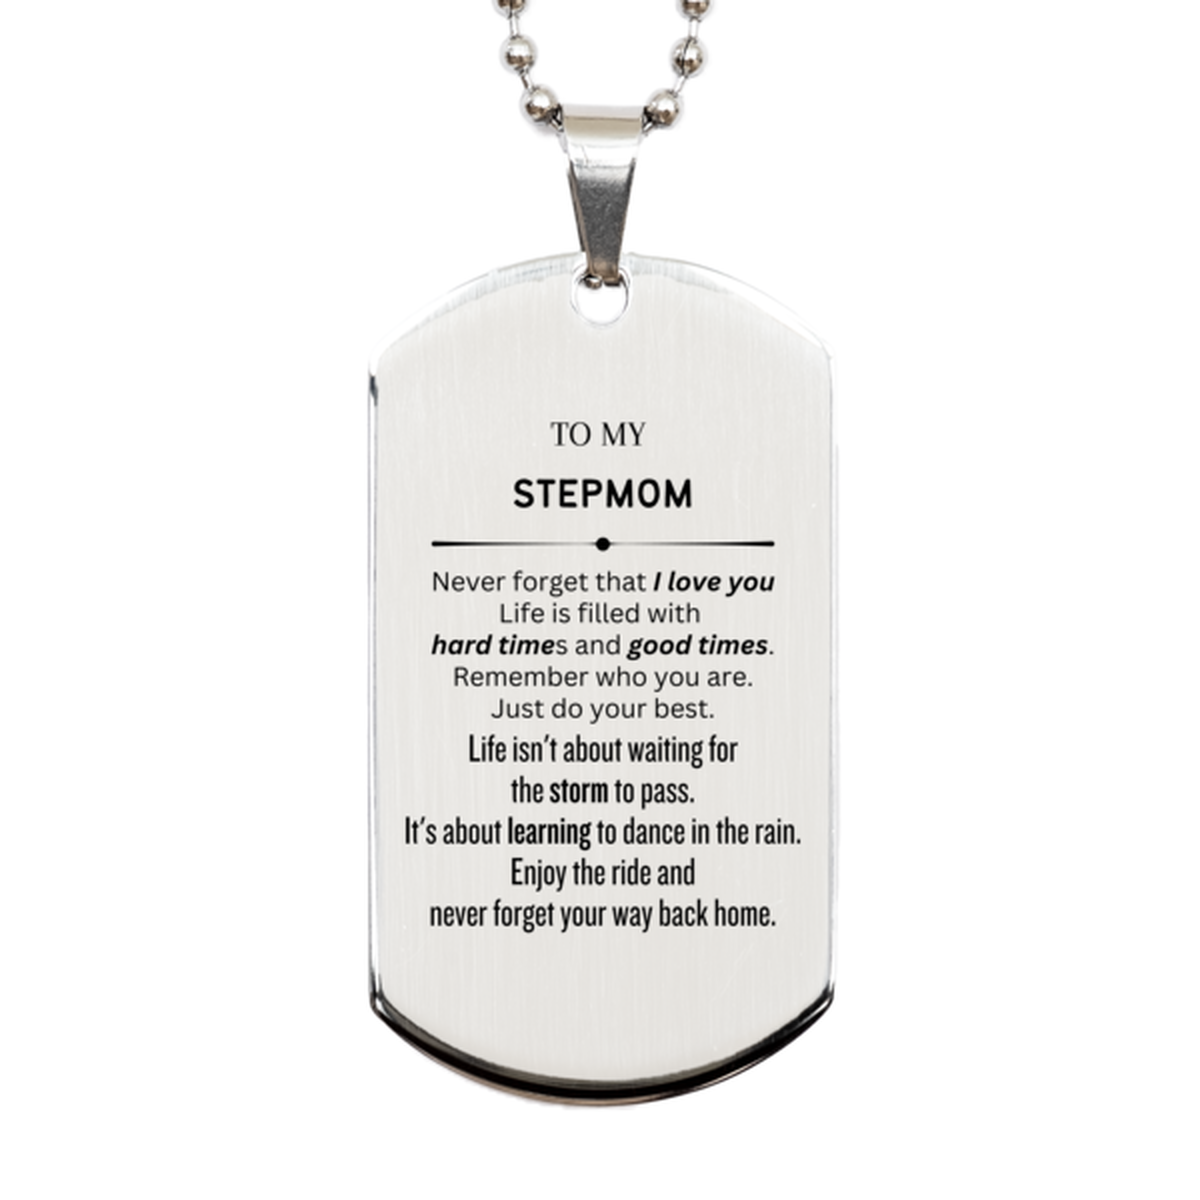 Christmas Stepmom Silver Dog Tag Gifts, To My Stepmom Birthday Thank You Gifts For Stepmom, Graduation Unique Gifts For Stepmom To My Stepmom Never forget that I love you life is filled with hard times and good times. Remember who you are. Just do your be